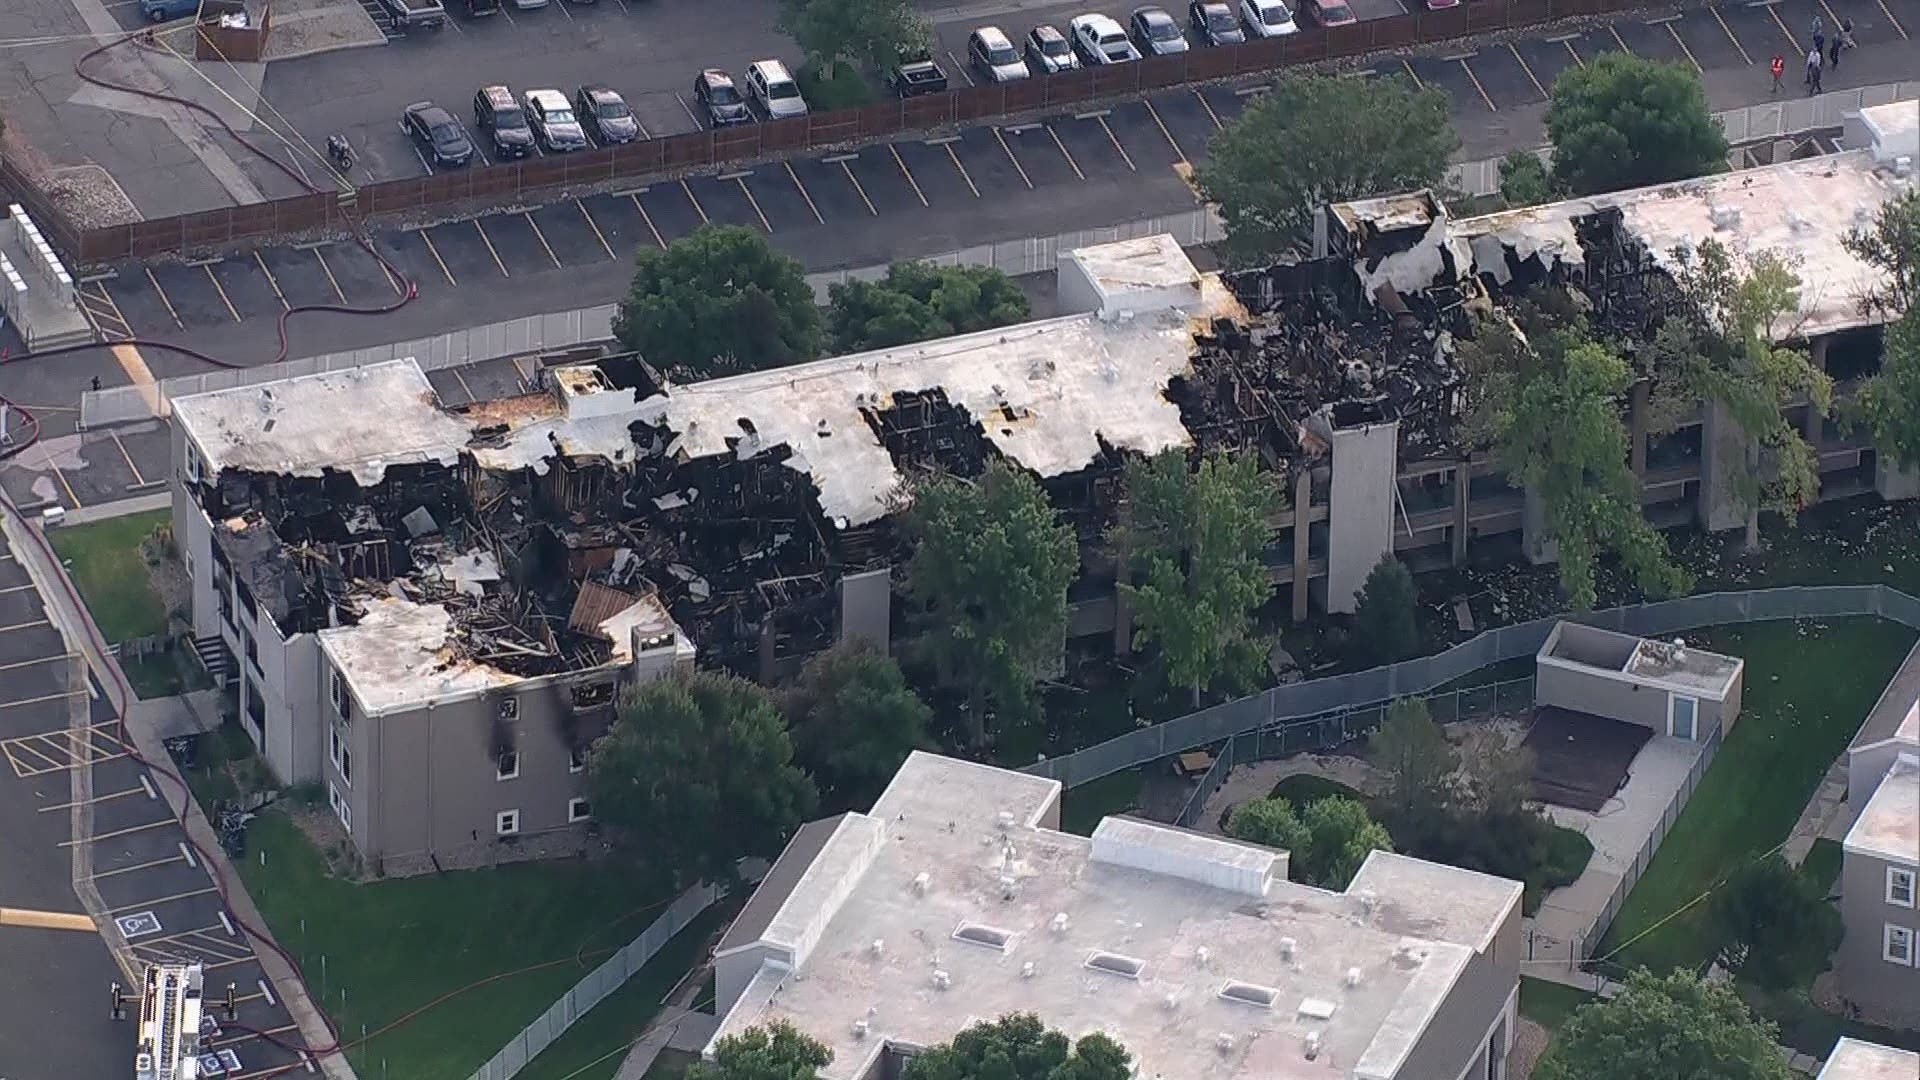 Monday morning SKY9 was over the complex that was damaged by fire on Sunday.